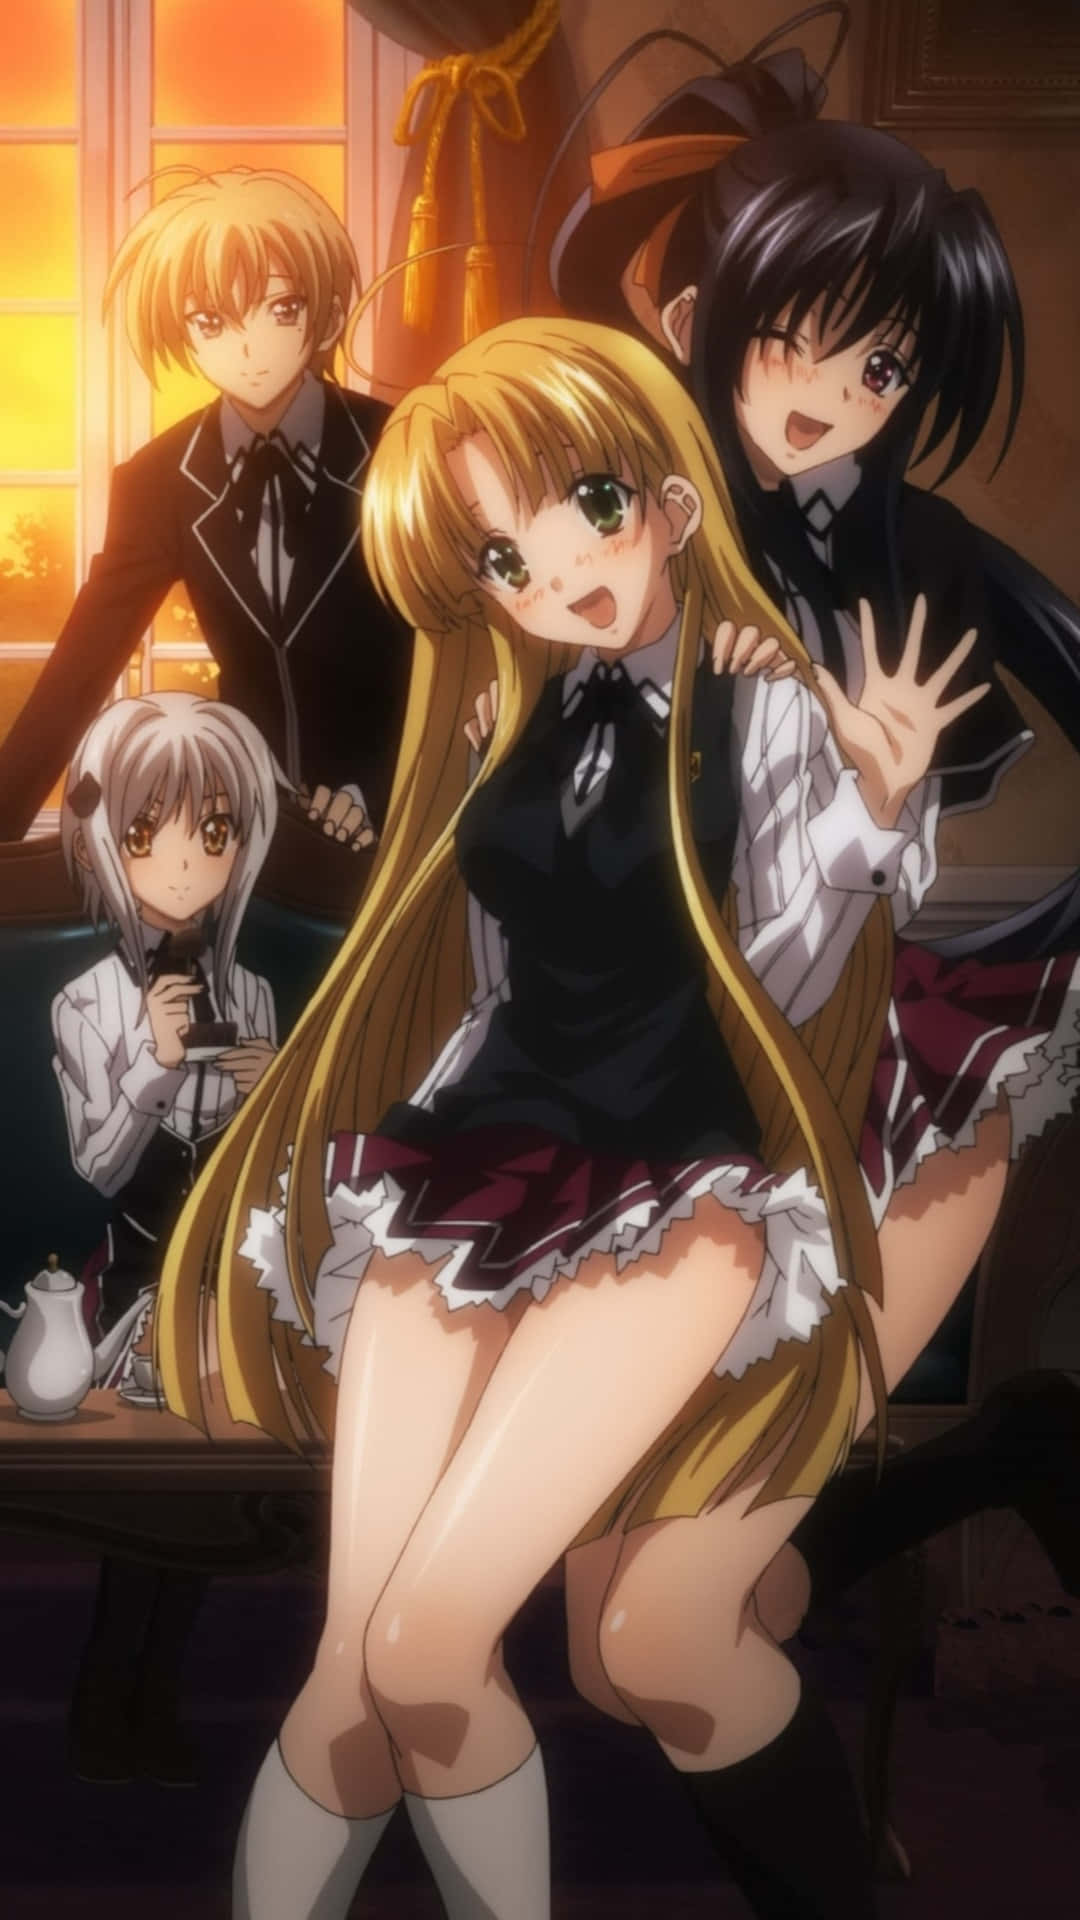 Highschool Dxd - the ultimate supernatural battle